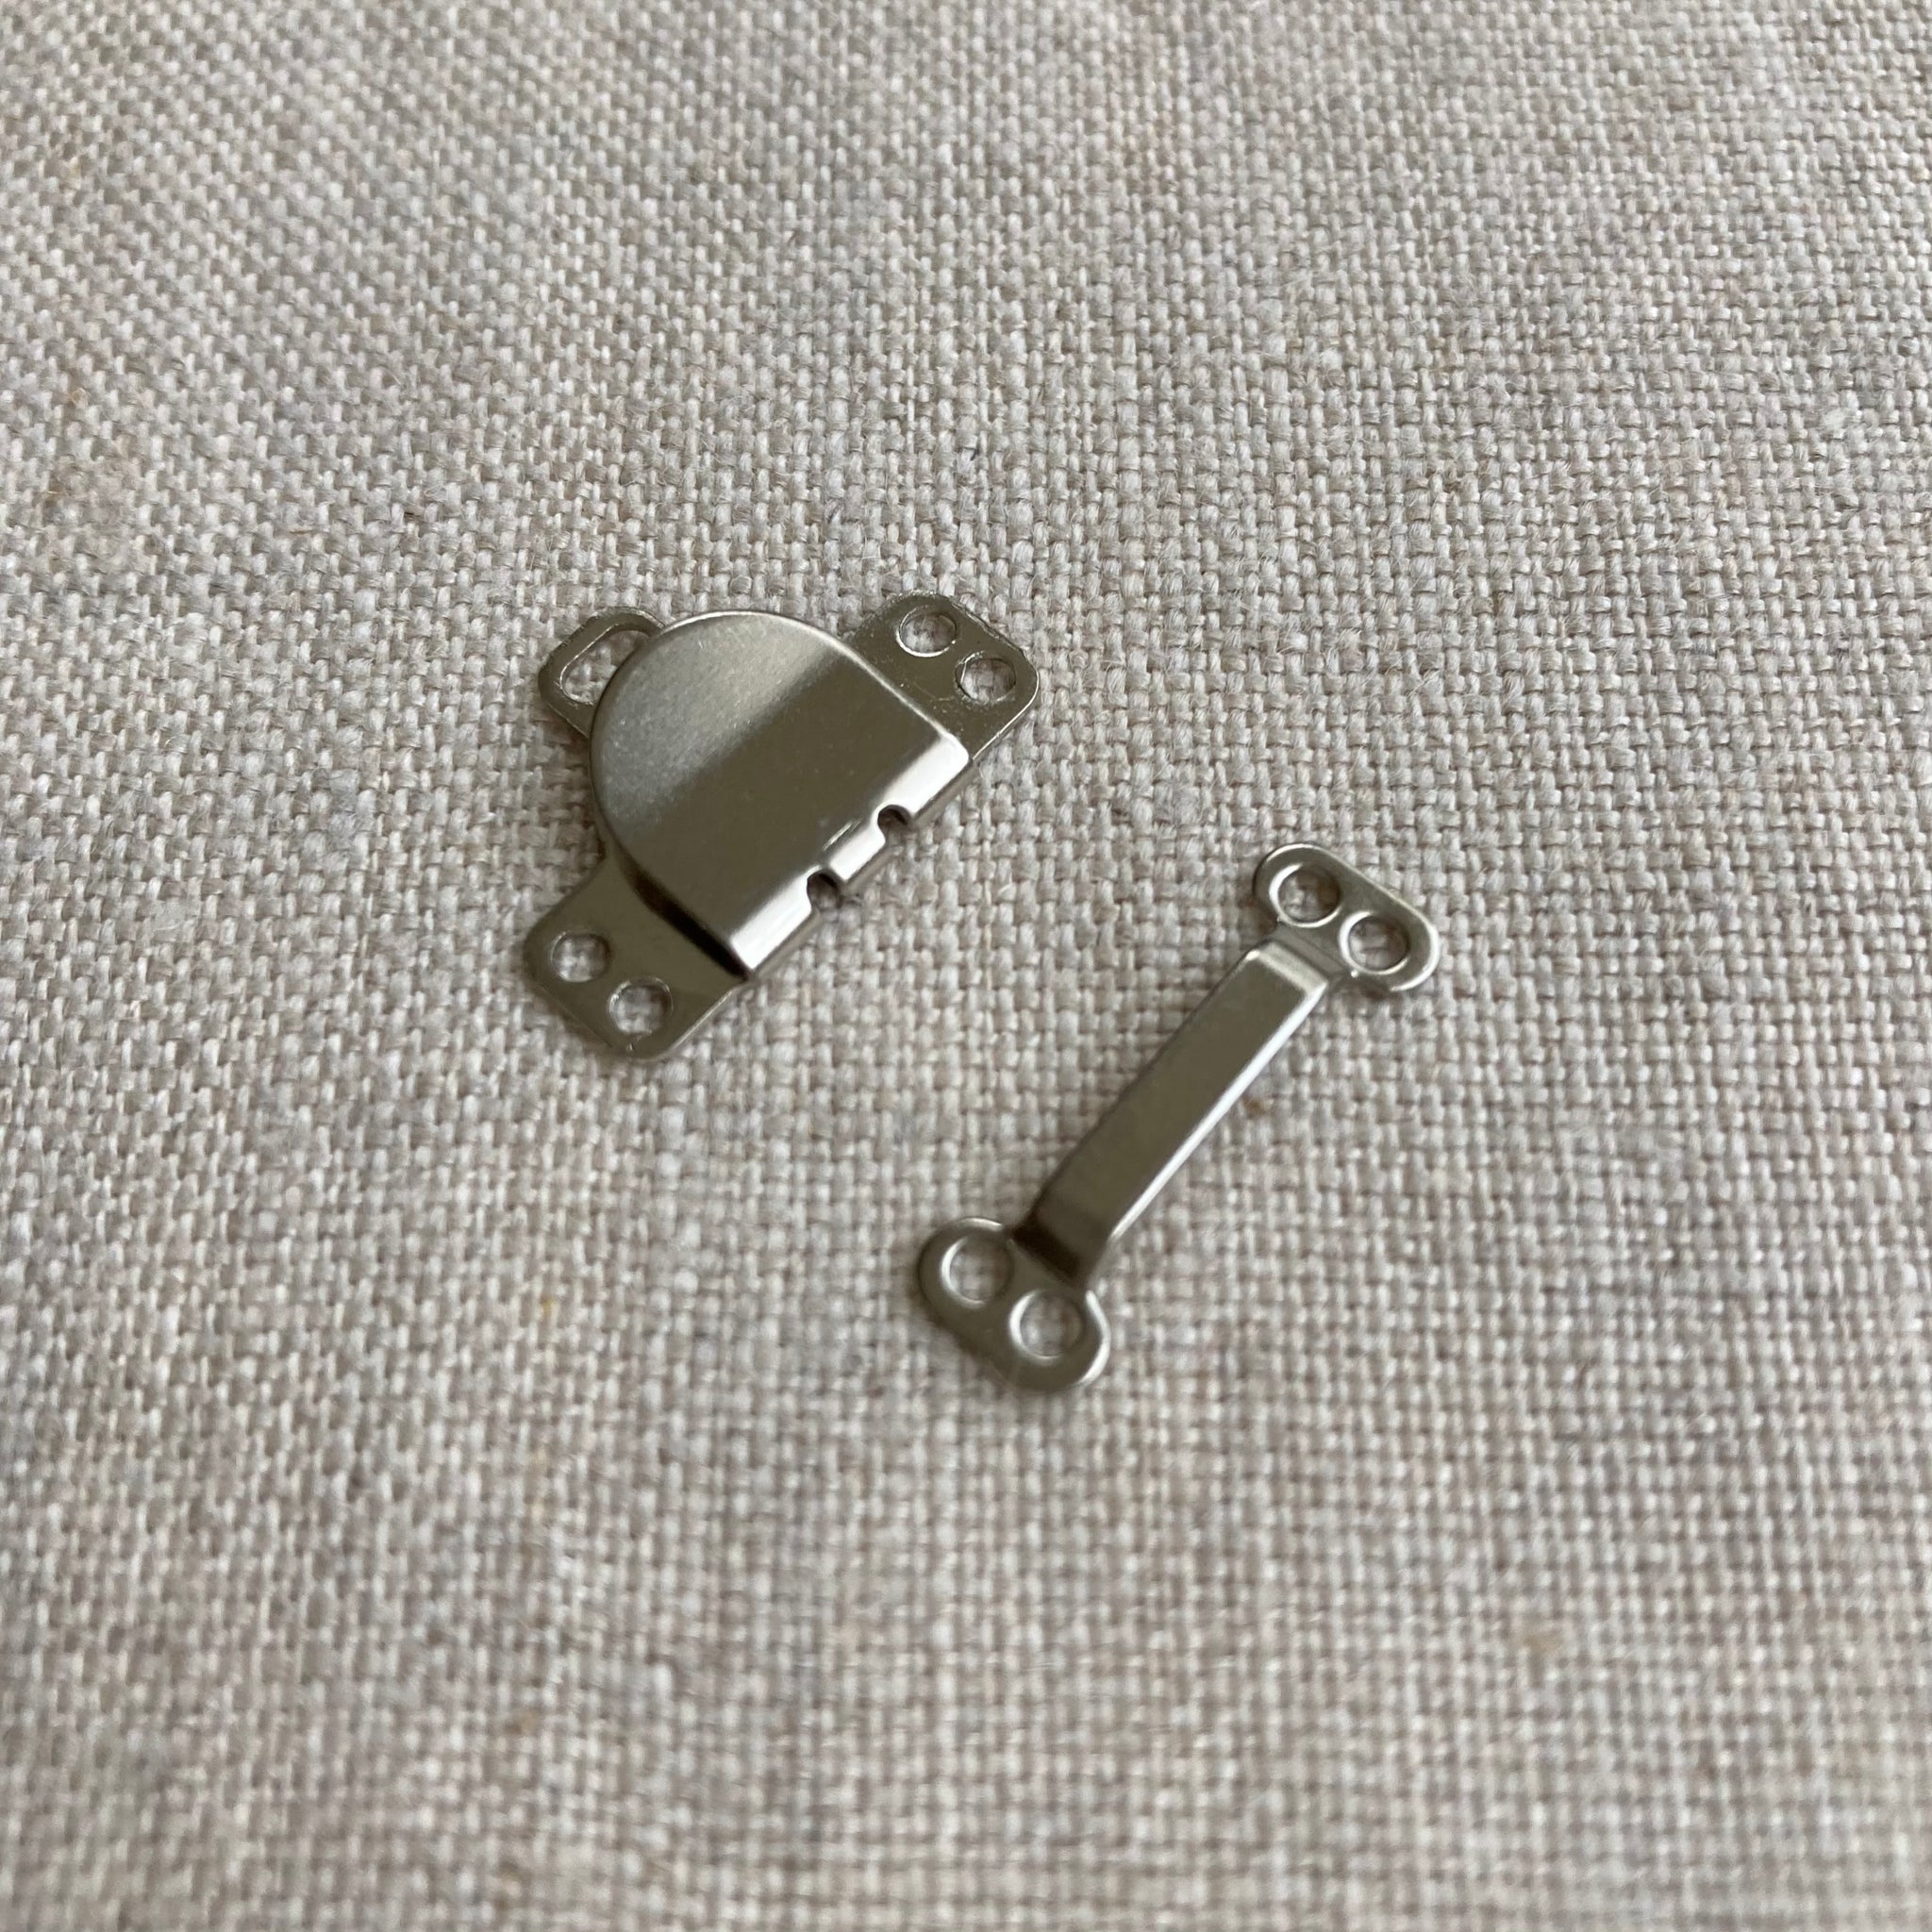 Black Hook and Bar Fasteners 4 Part Hook and Eye Clasp Metal Hook and Eye  Closures Sew on Hook and Bar for Trouser Skirts Pants 20set - Etsy